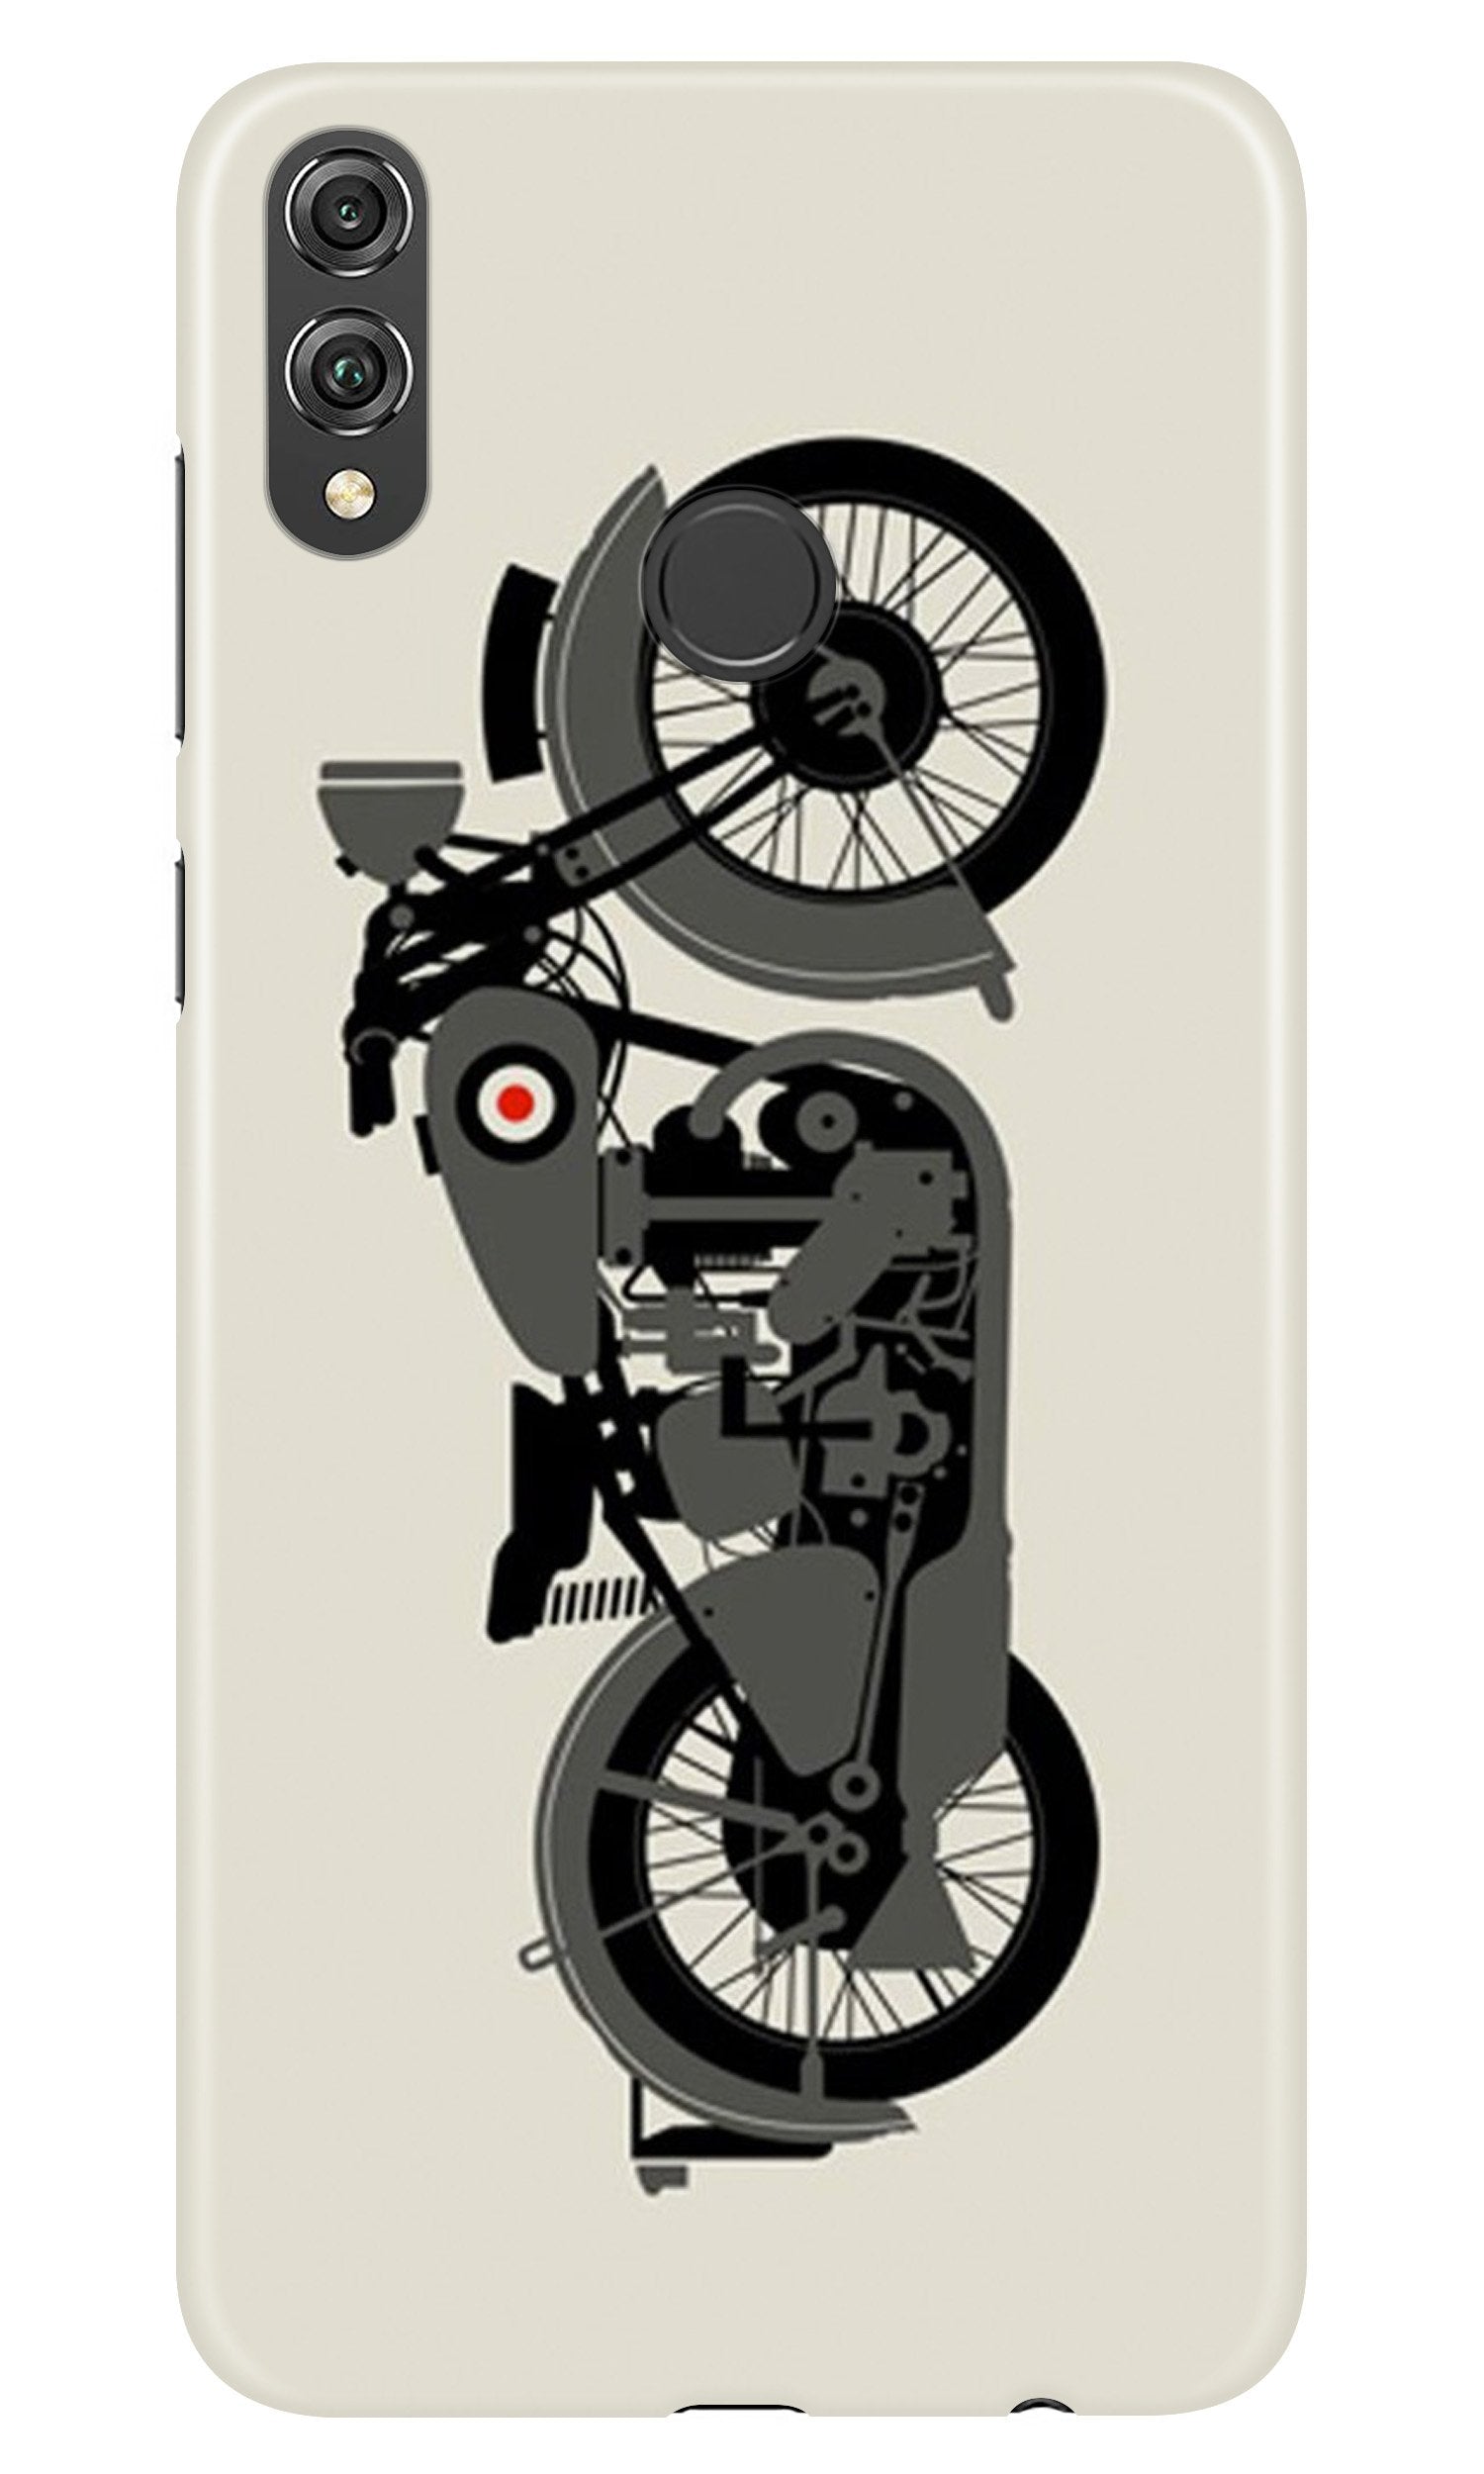 MotorCycle Case for Infinix Hot 7 Pro (Design No. 259)